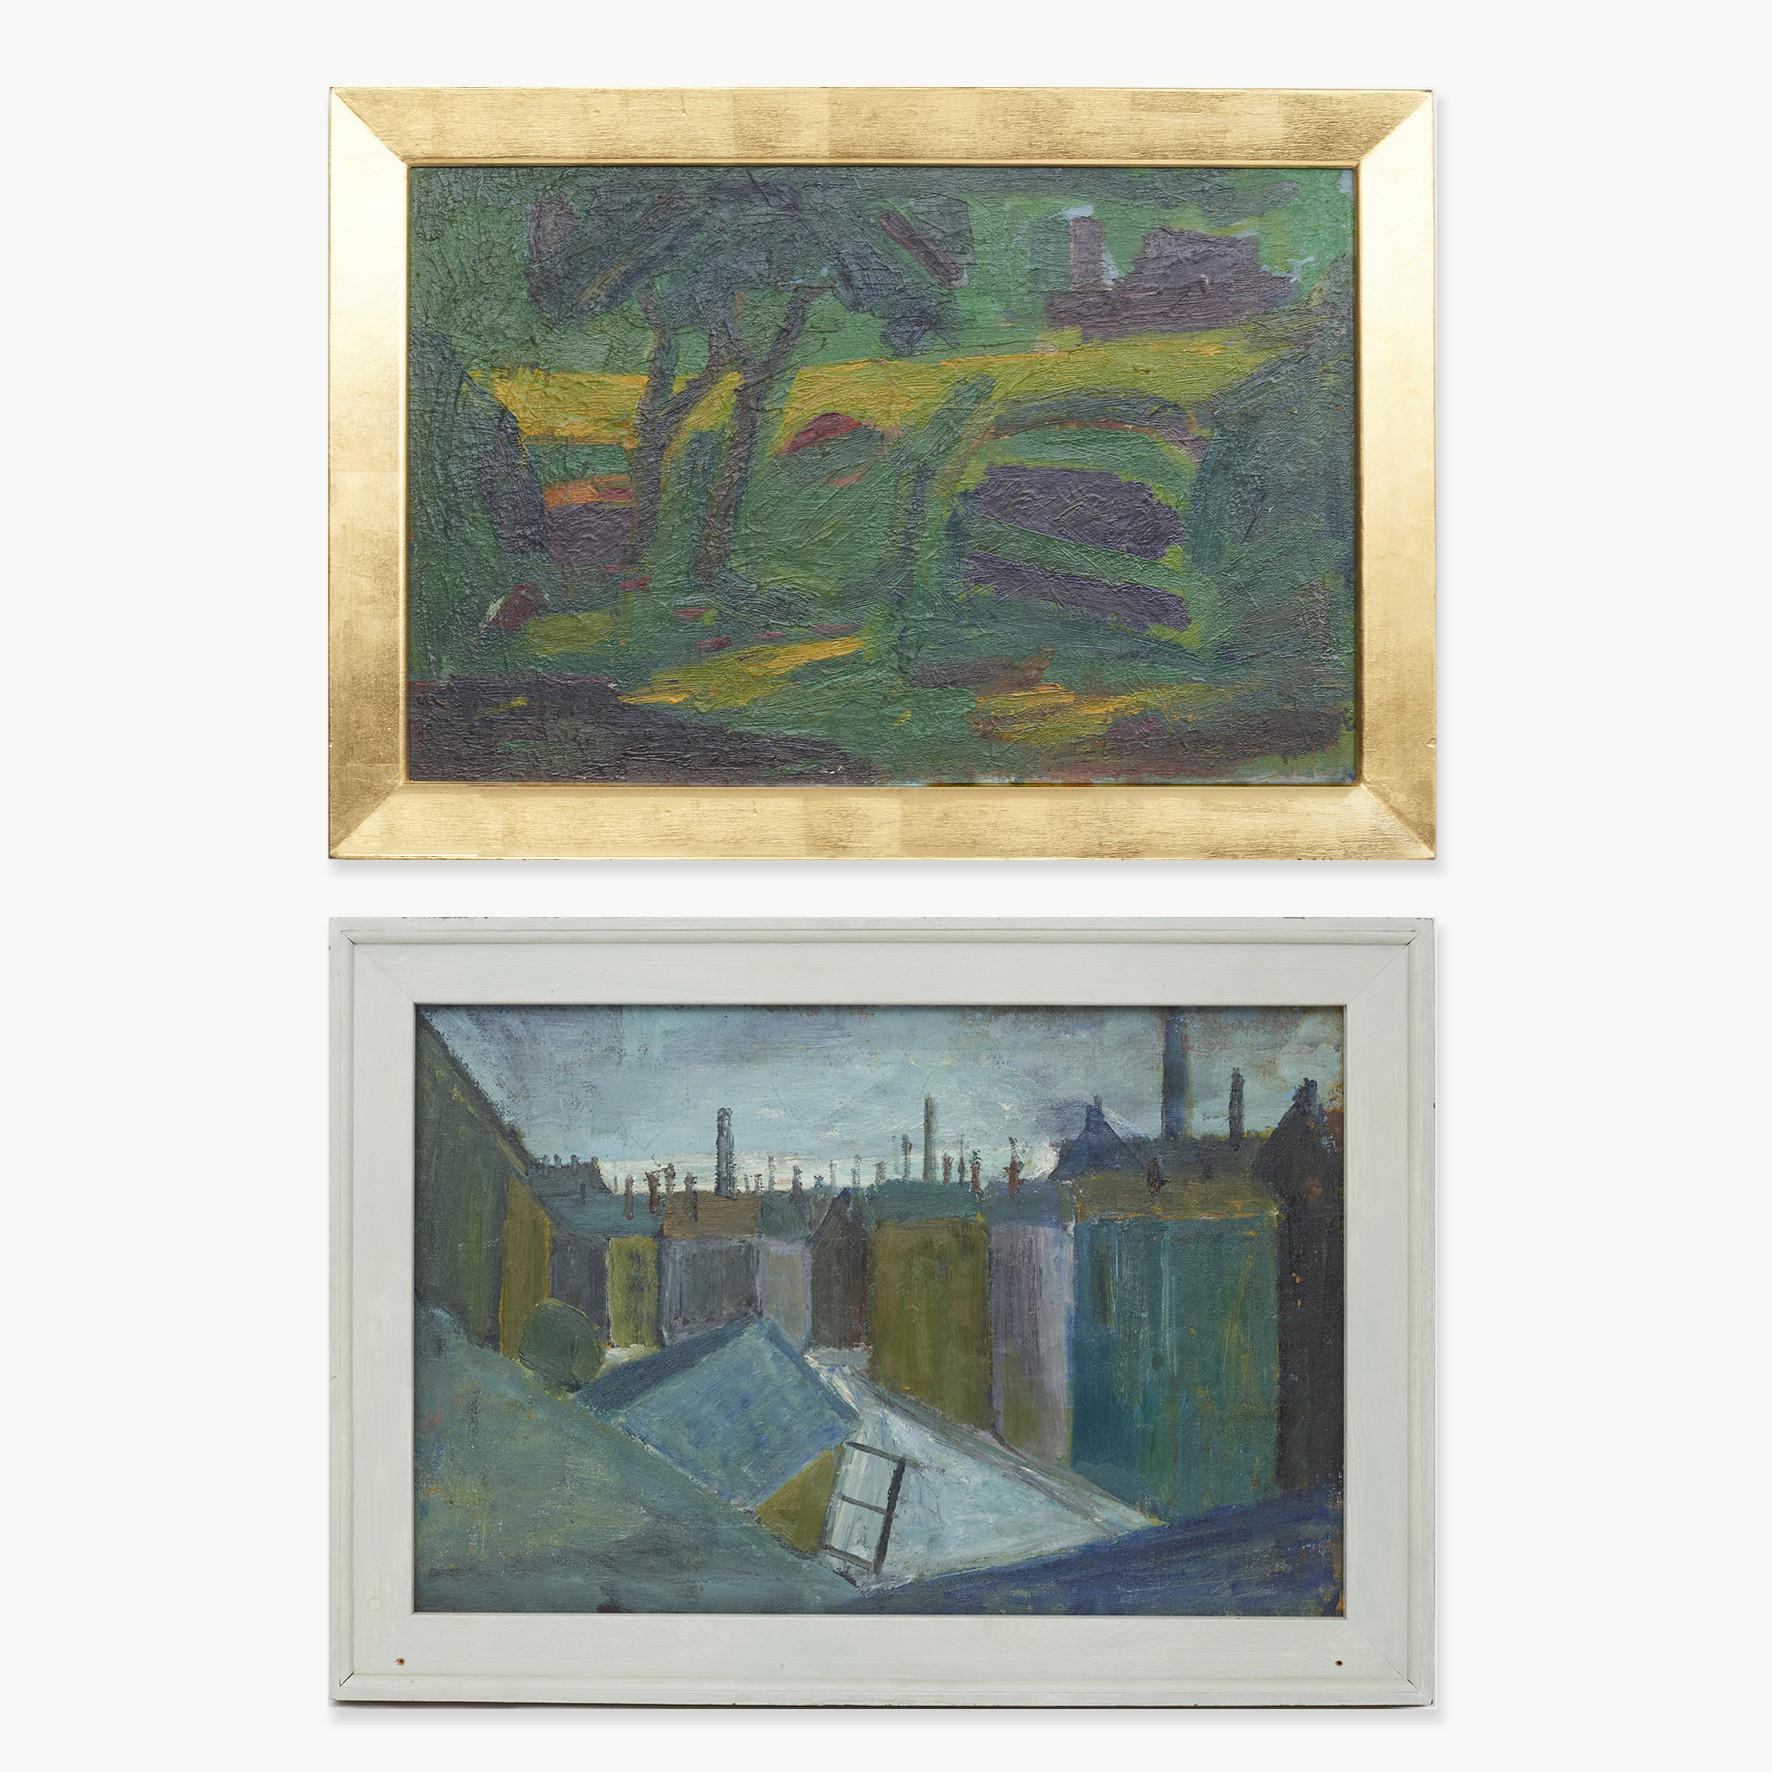 Erik Hoppe 1897-1968. Oil on canvas.
Double-sided painting. Painted back-to-back on a single piece of canvas.

1: Scene from Søndermarken (Copenhagen, Denmark). Strong green colors.
Gold frame.

2: Urban scene. Subdued colors in shades of blue